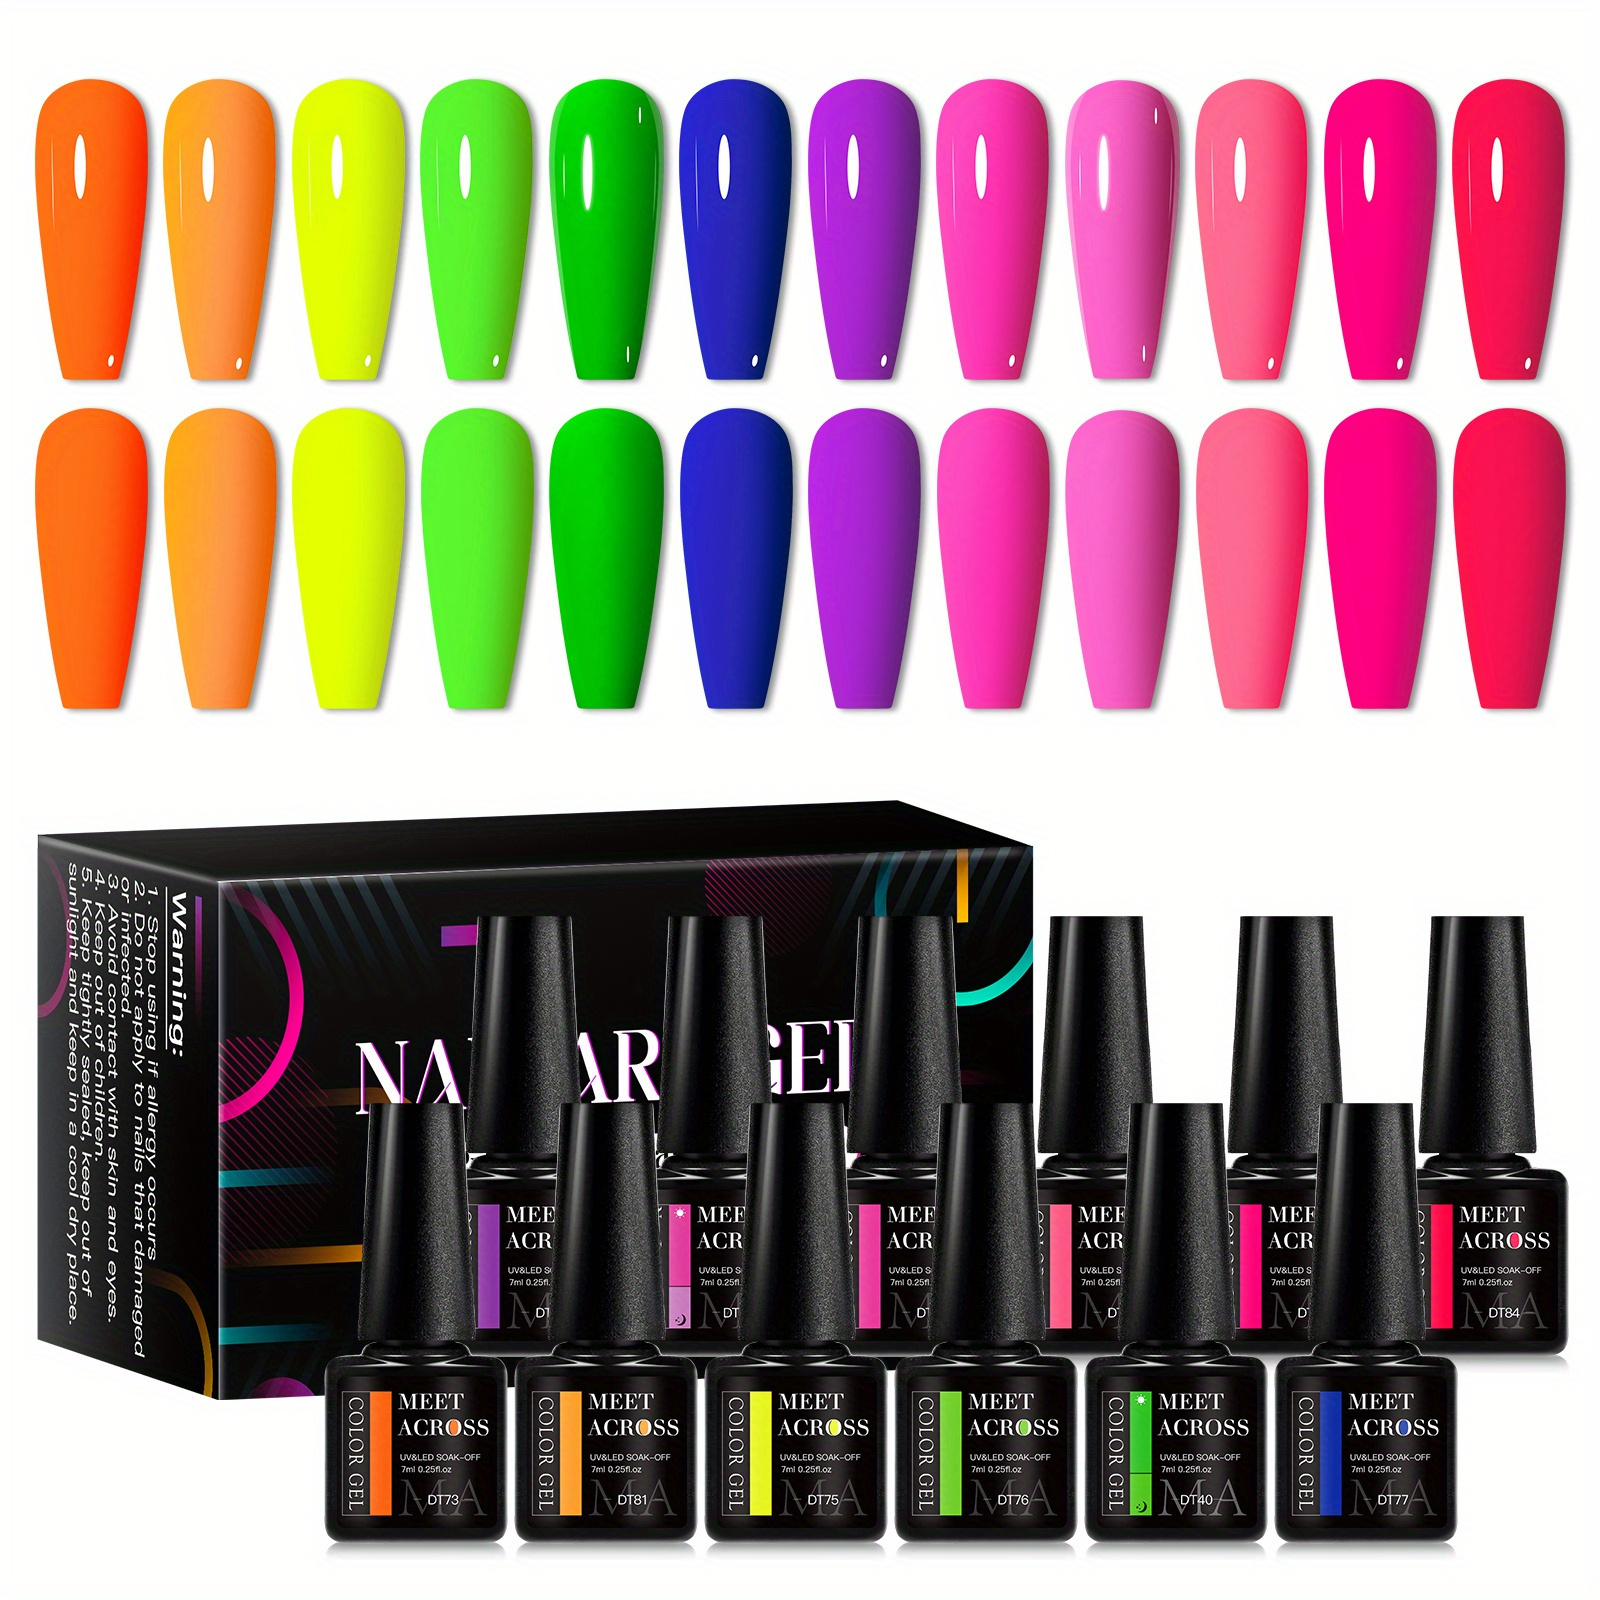 

12 Colors Neon Gel Nail Polish Set, Bright Fluorescent Spring Summer Collection, Long-lasting Soak Off Led Nail Gel Kit, Perfect For Diy Manicure, Low Odor With Smooth Formula, Ideal Holiday Gift Set